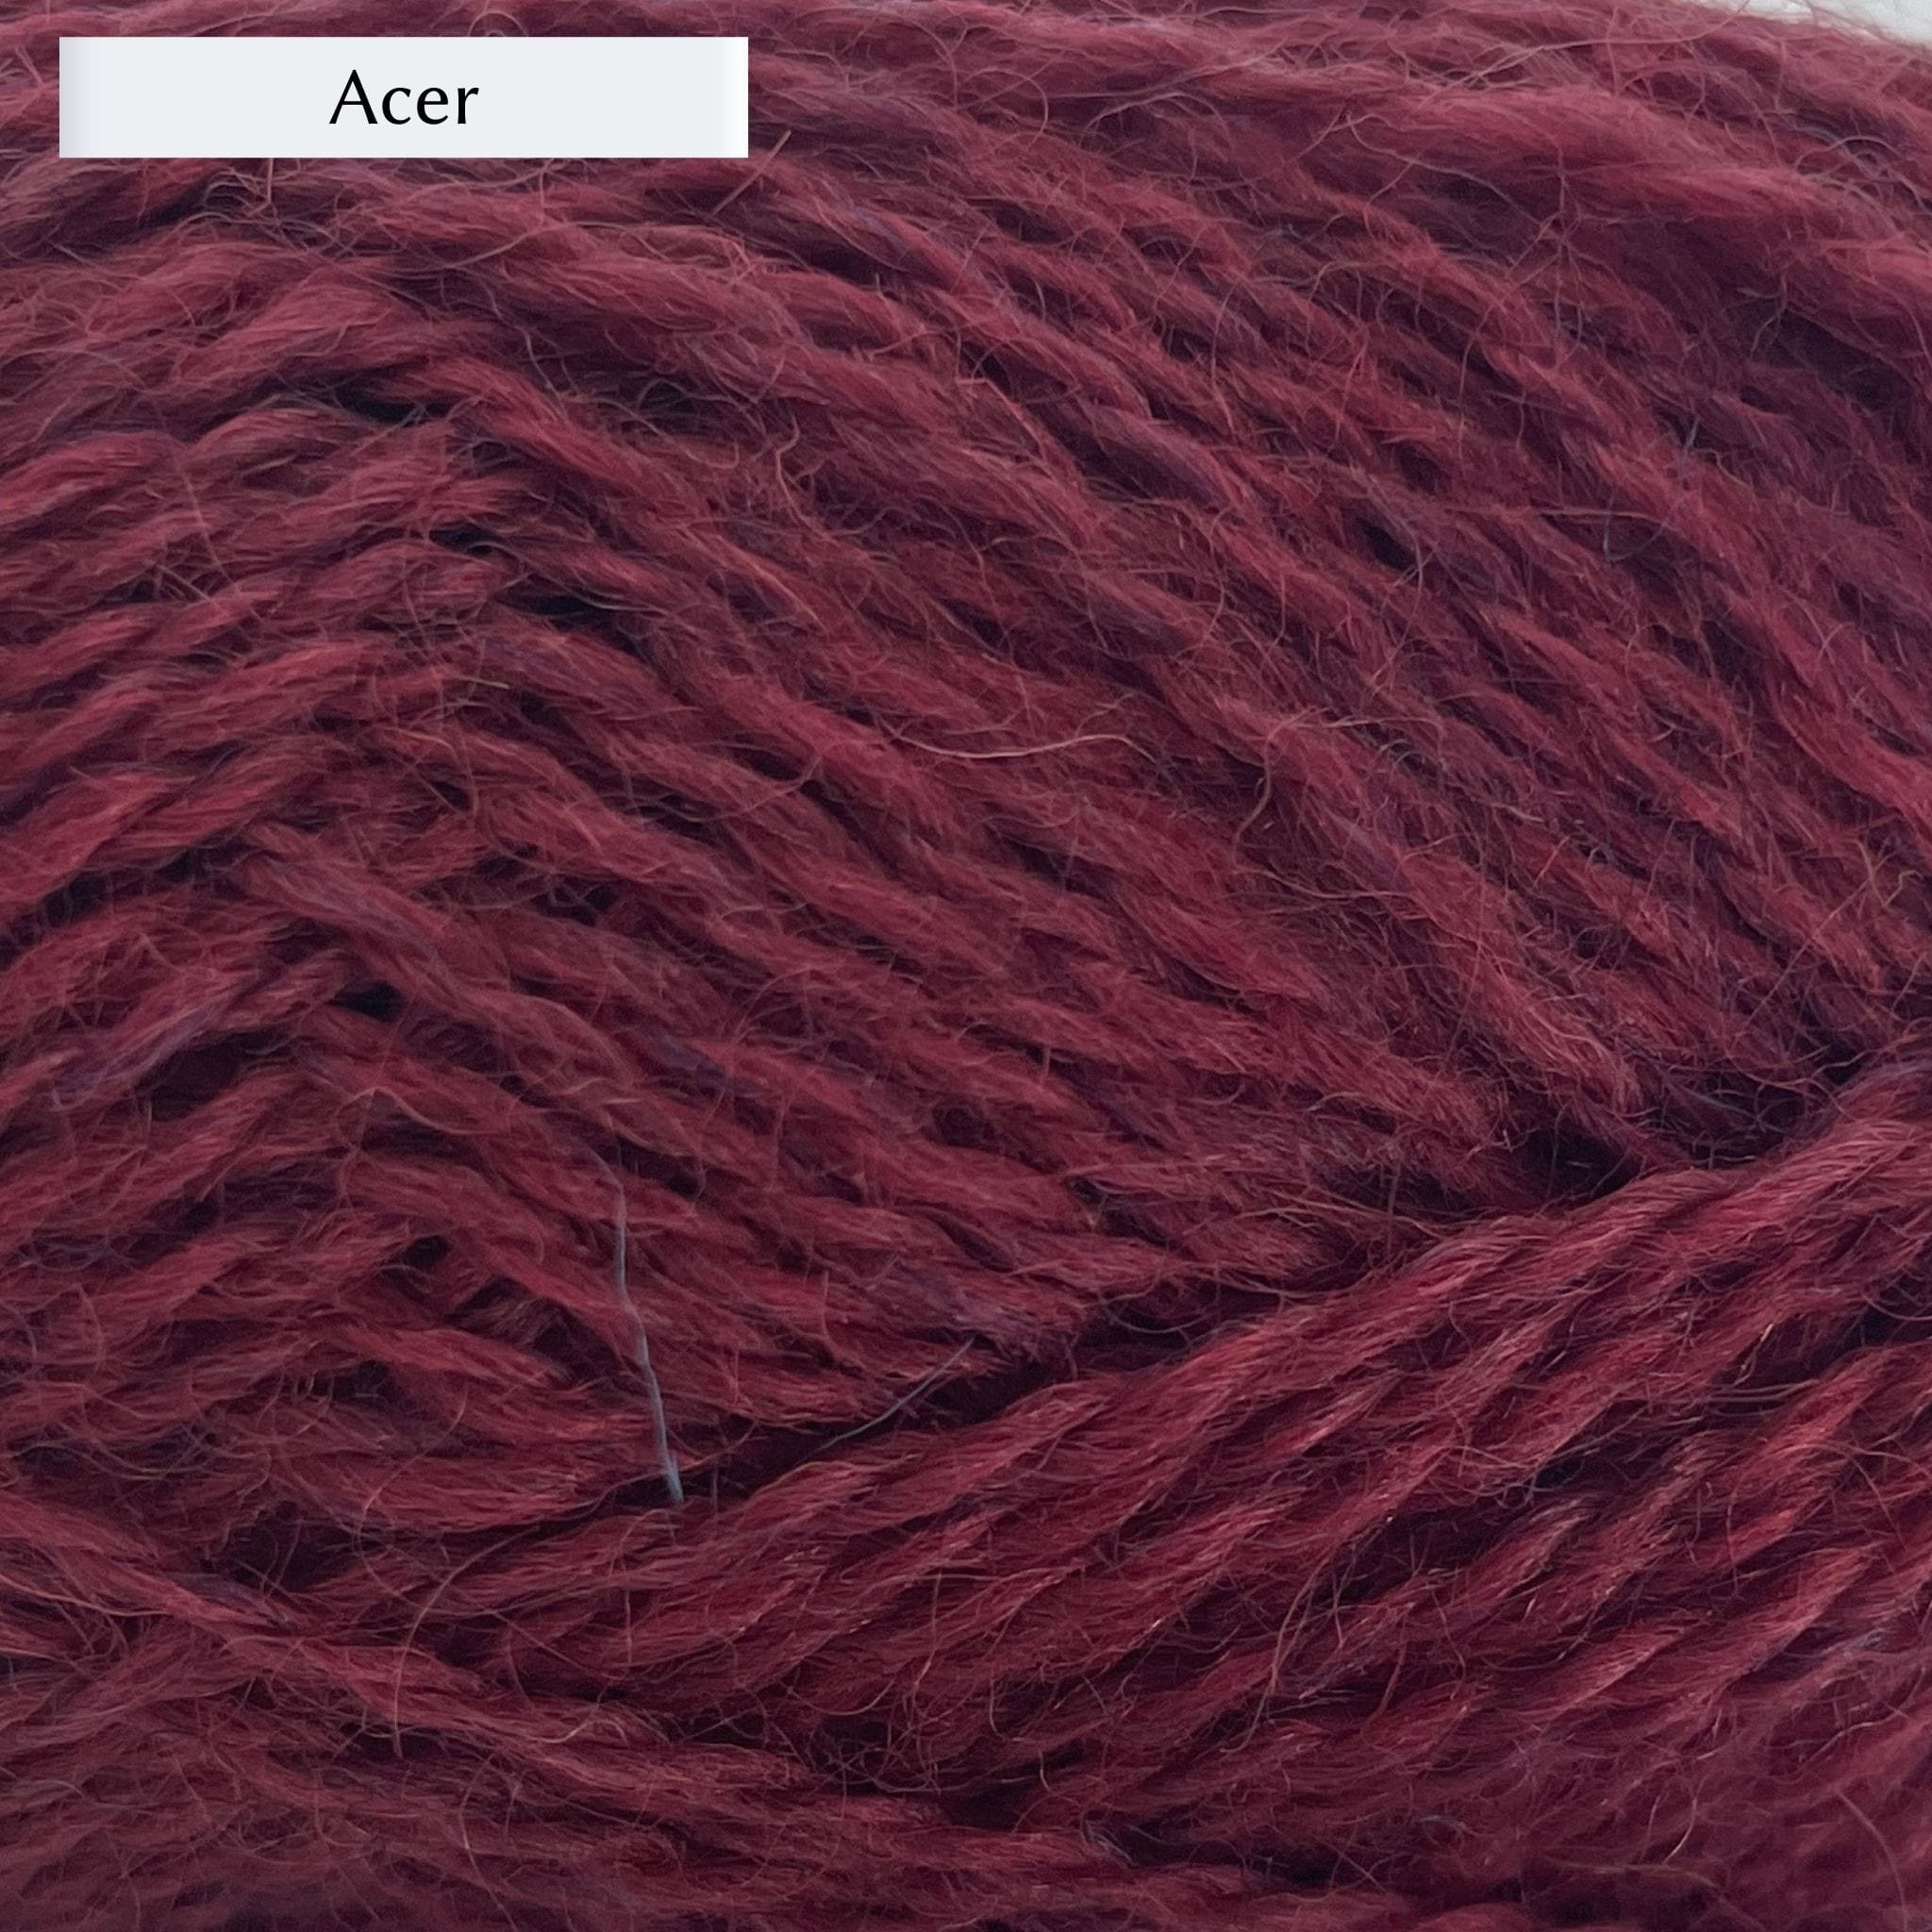 Marie Wallin's British Breeds yarn, a fingering weight, in color Acer, a deep burgundy